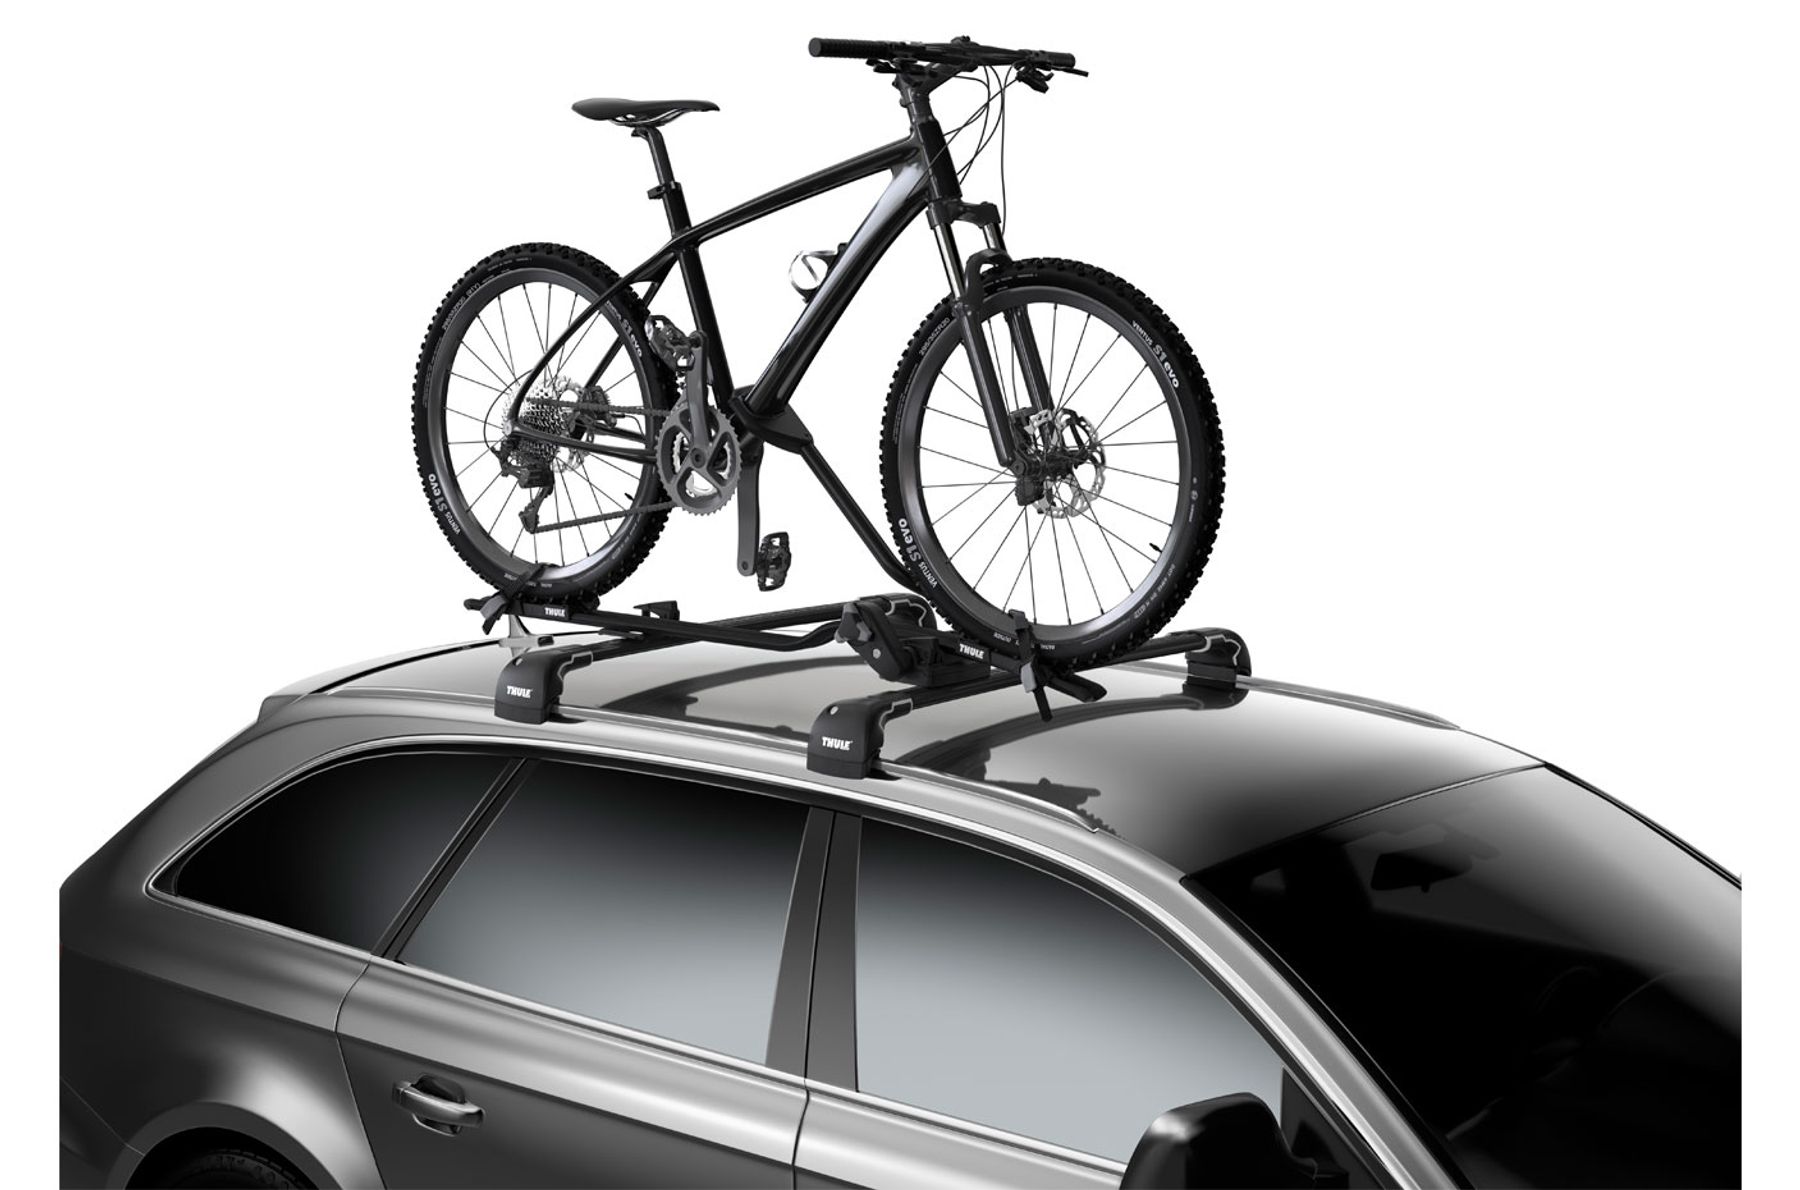 Universal Adjustable Roof Mount Bicycle Rack Carrier Easy Clamp upside down fit 